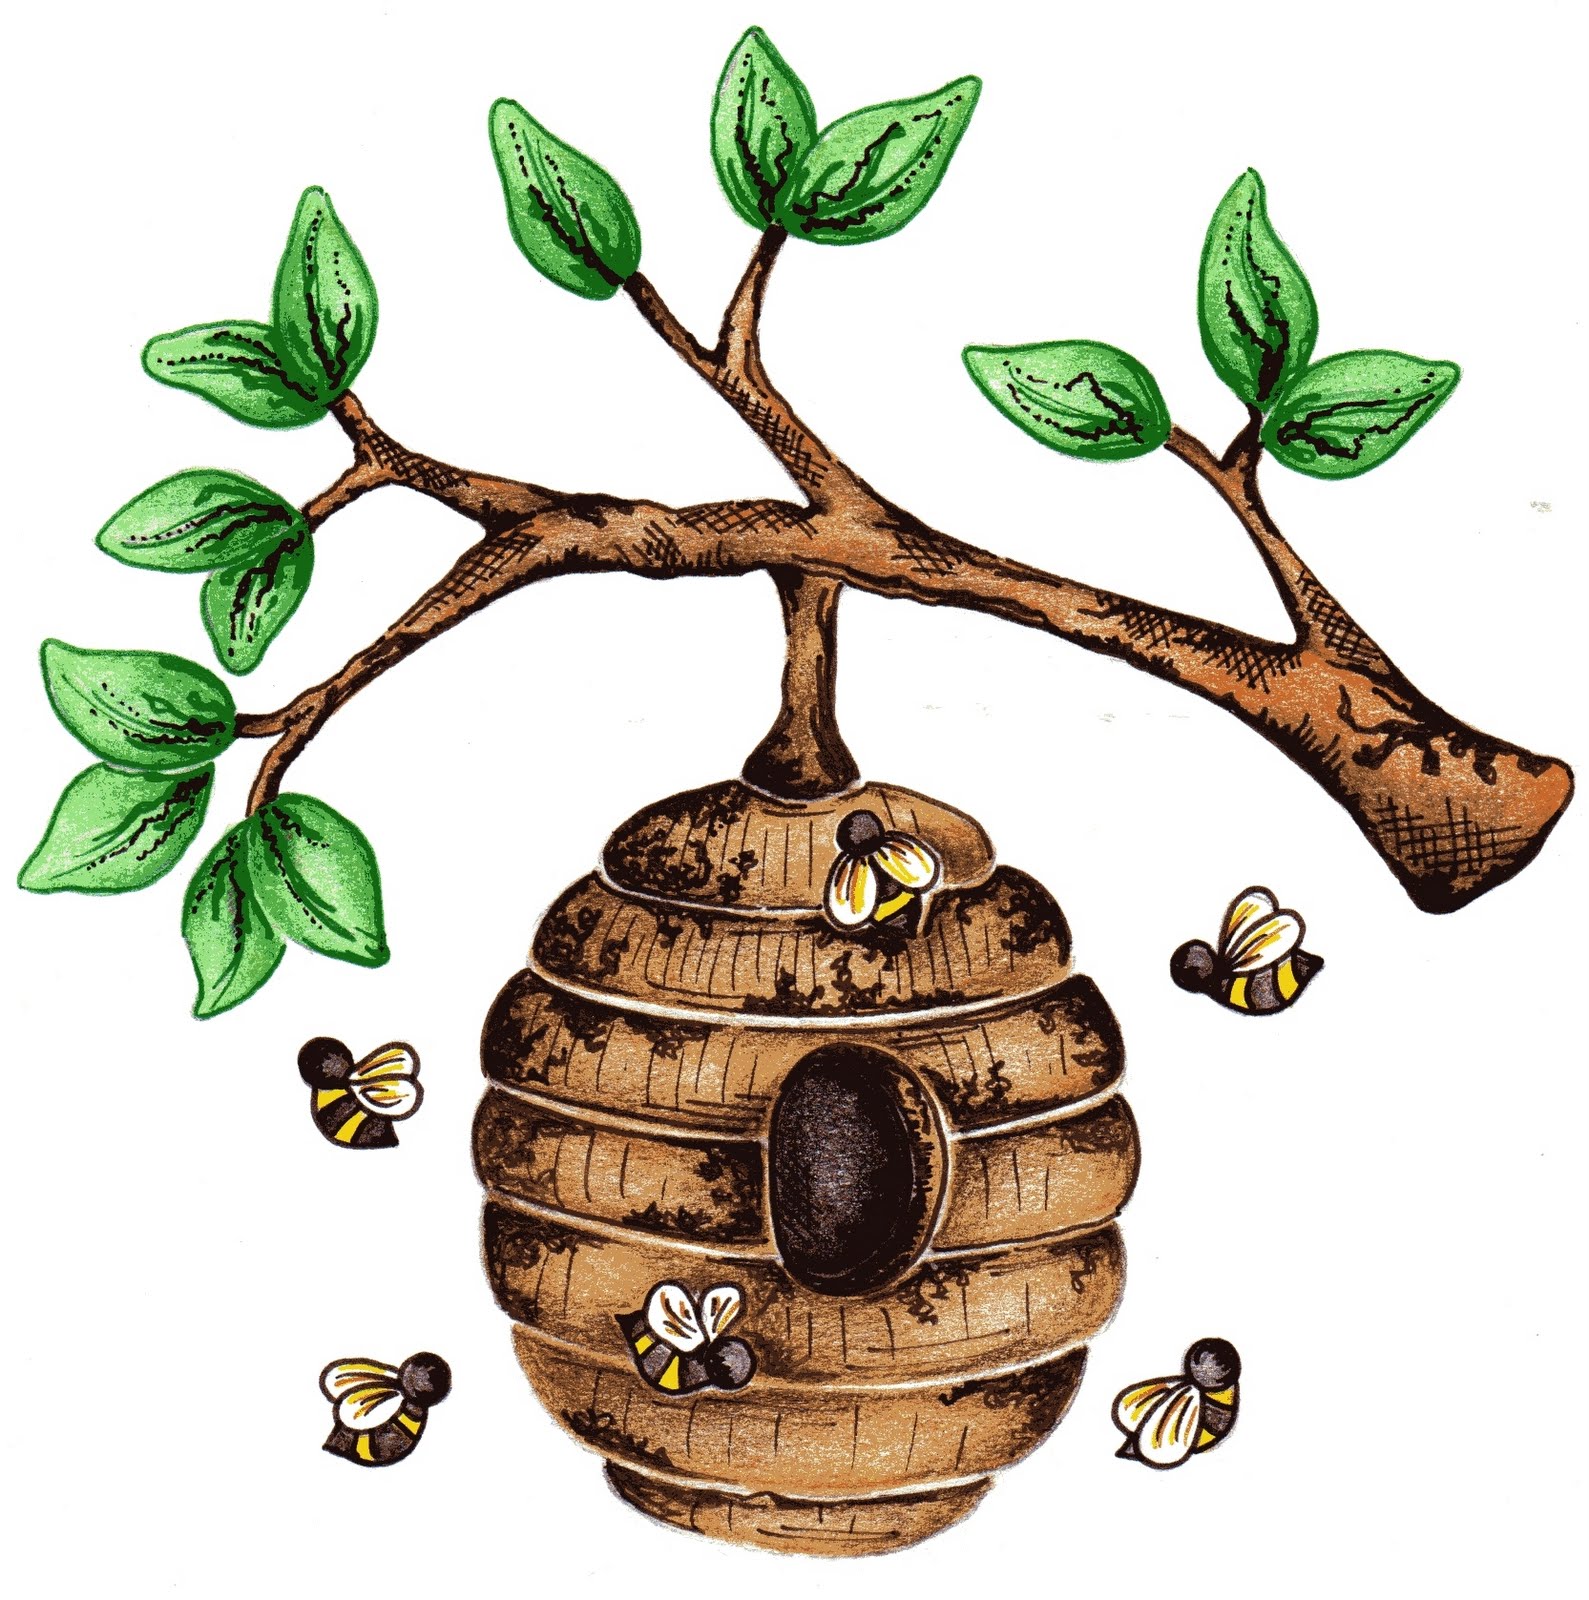 Beehive images for bee hive in tree clip art - Clipartix